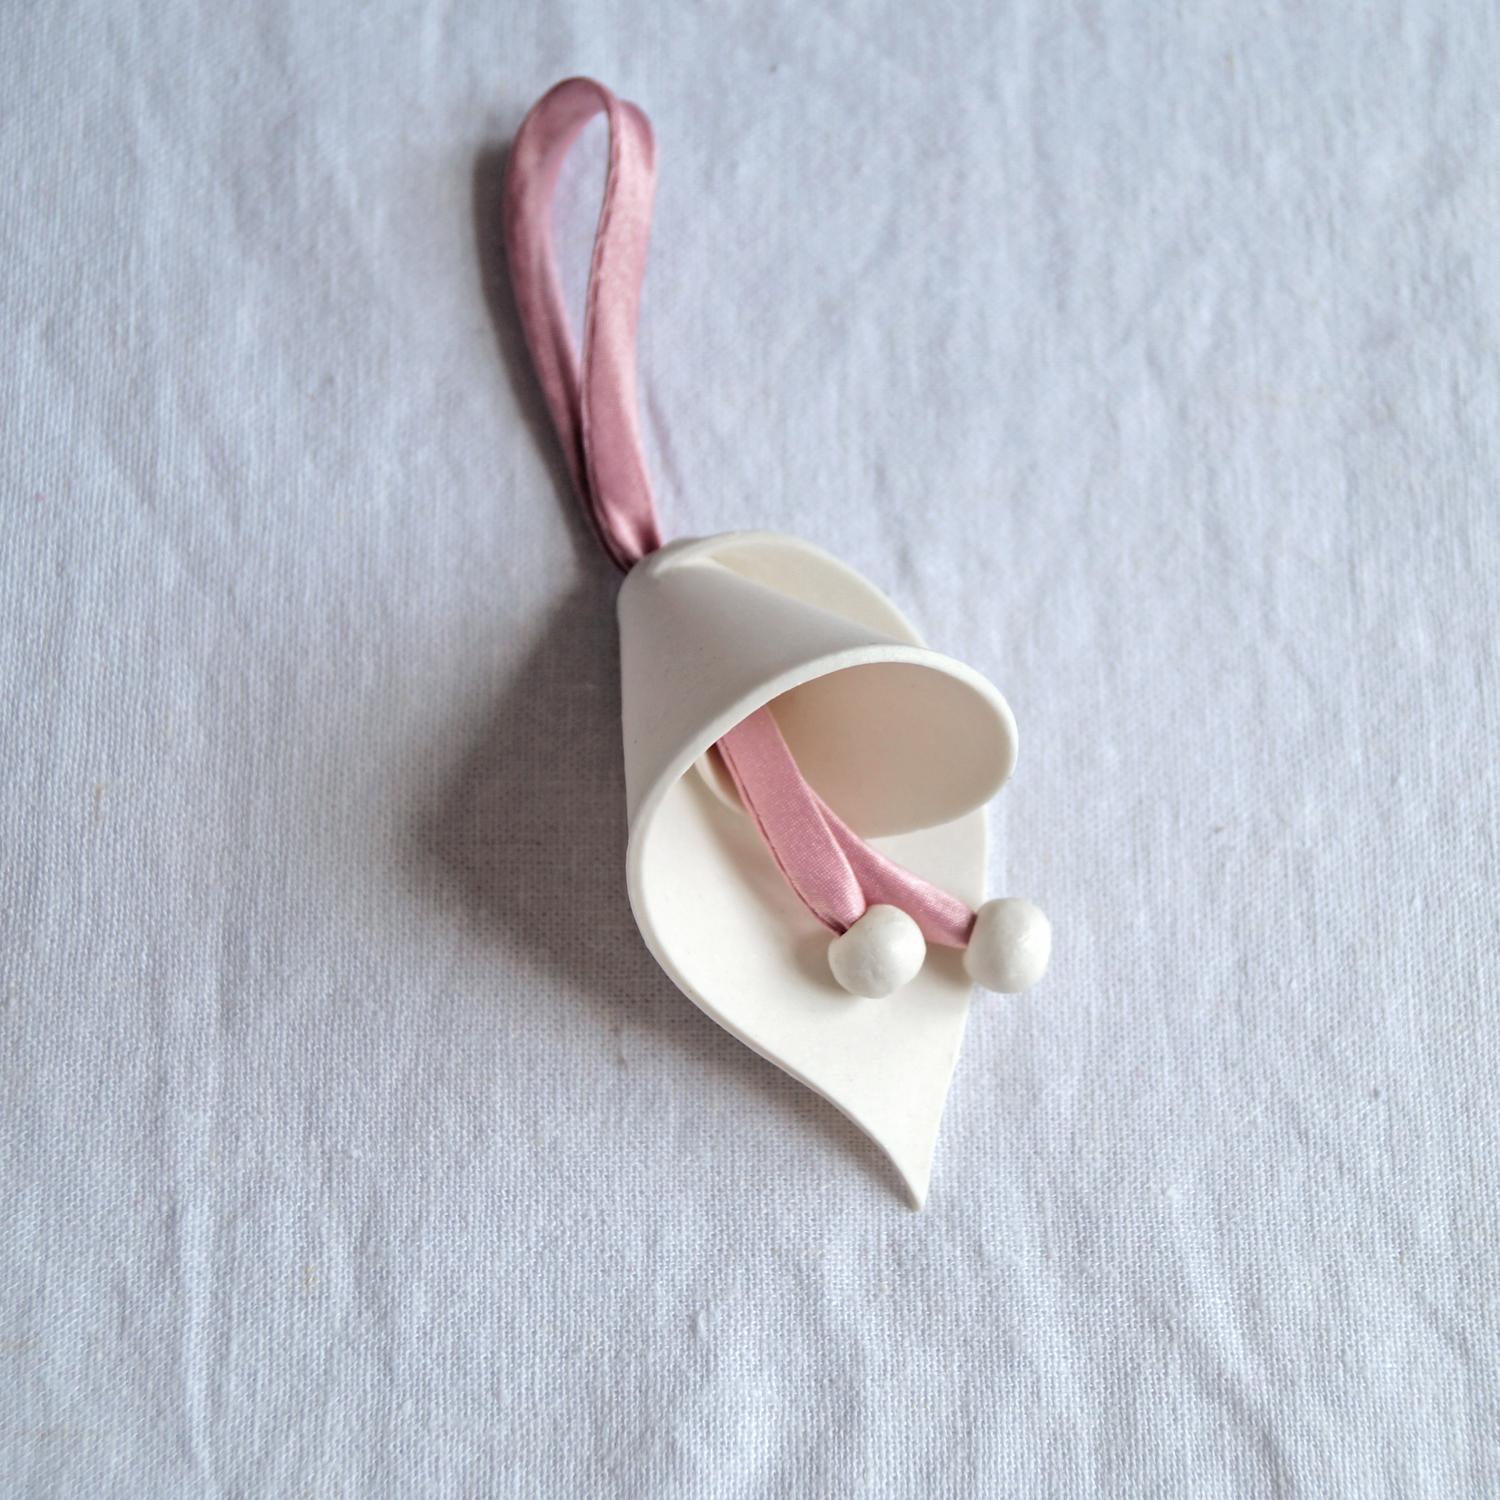 Spiral LILY Christmas bells, mini bells blue cord, small bell pink ribbon, tinkling bells, ceramic bells, choose size, white 